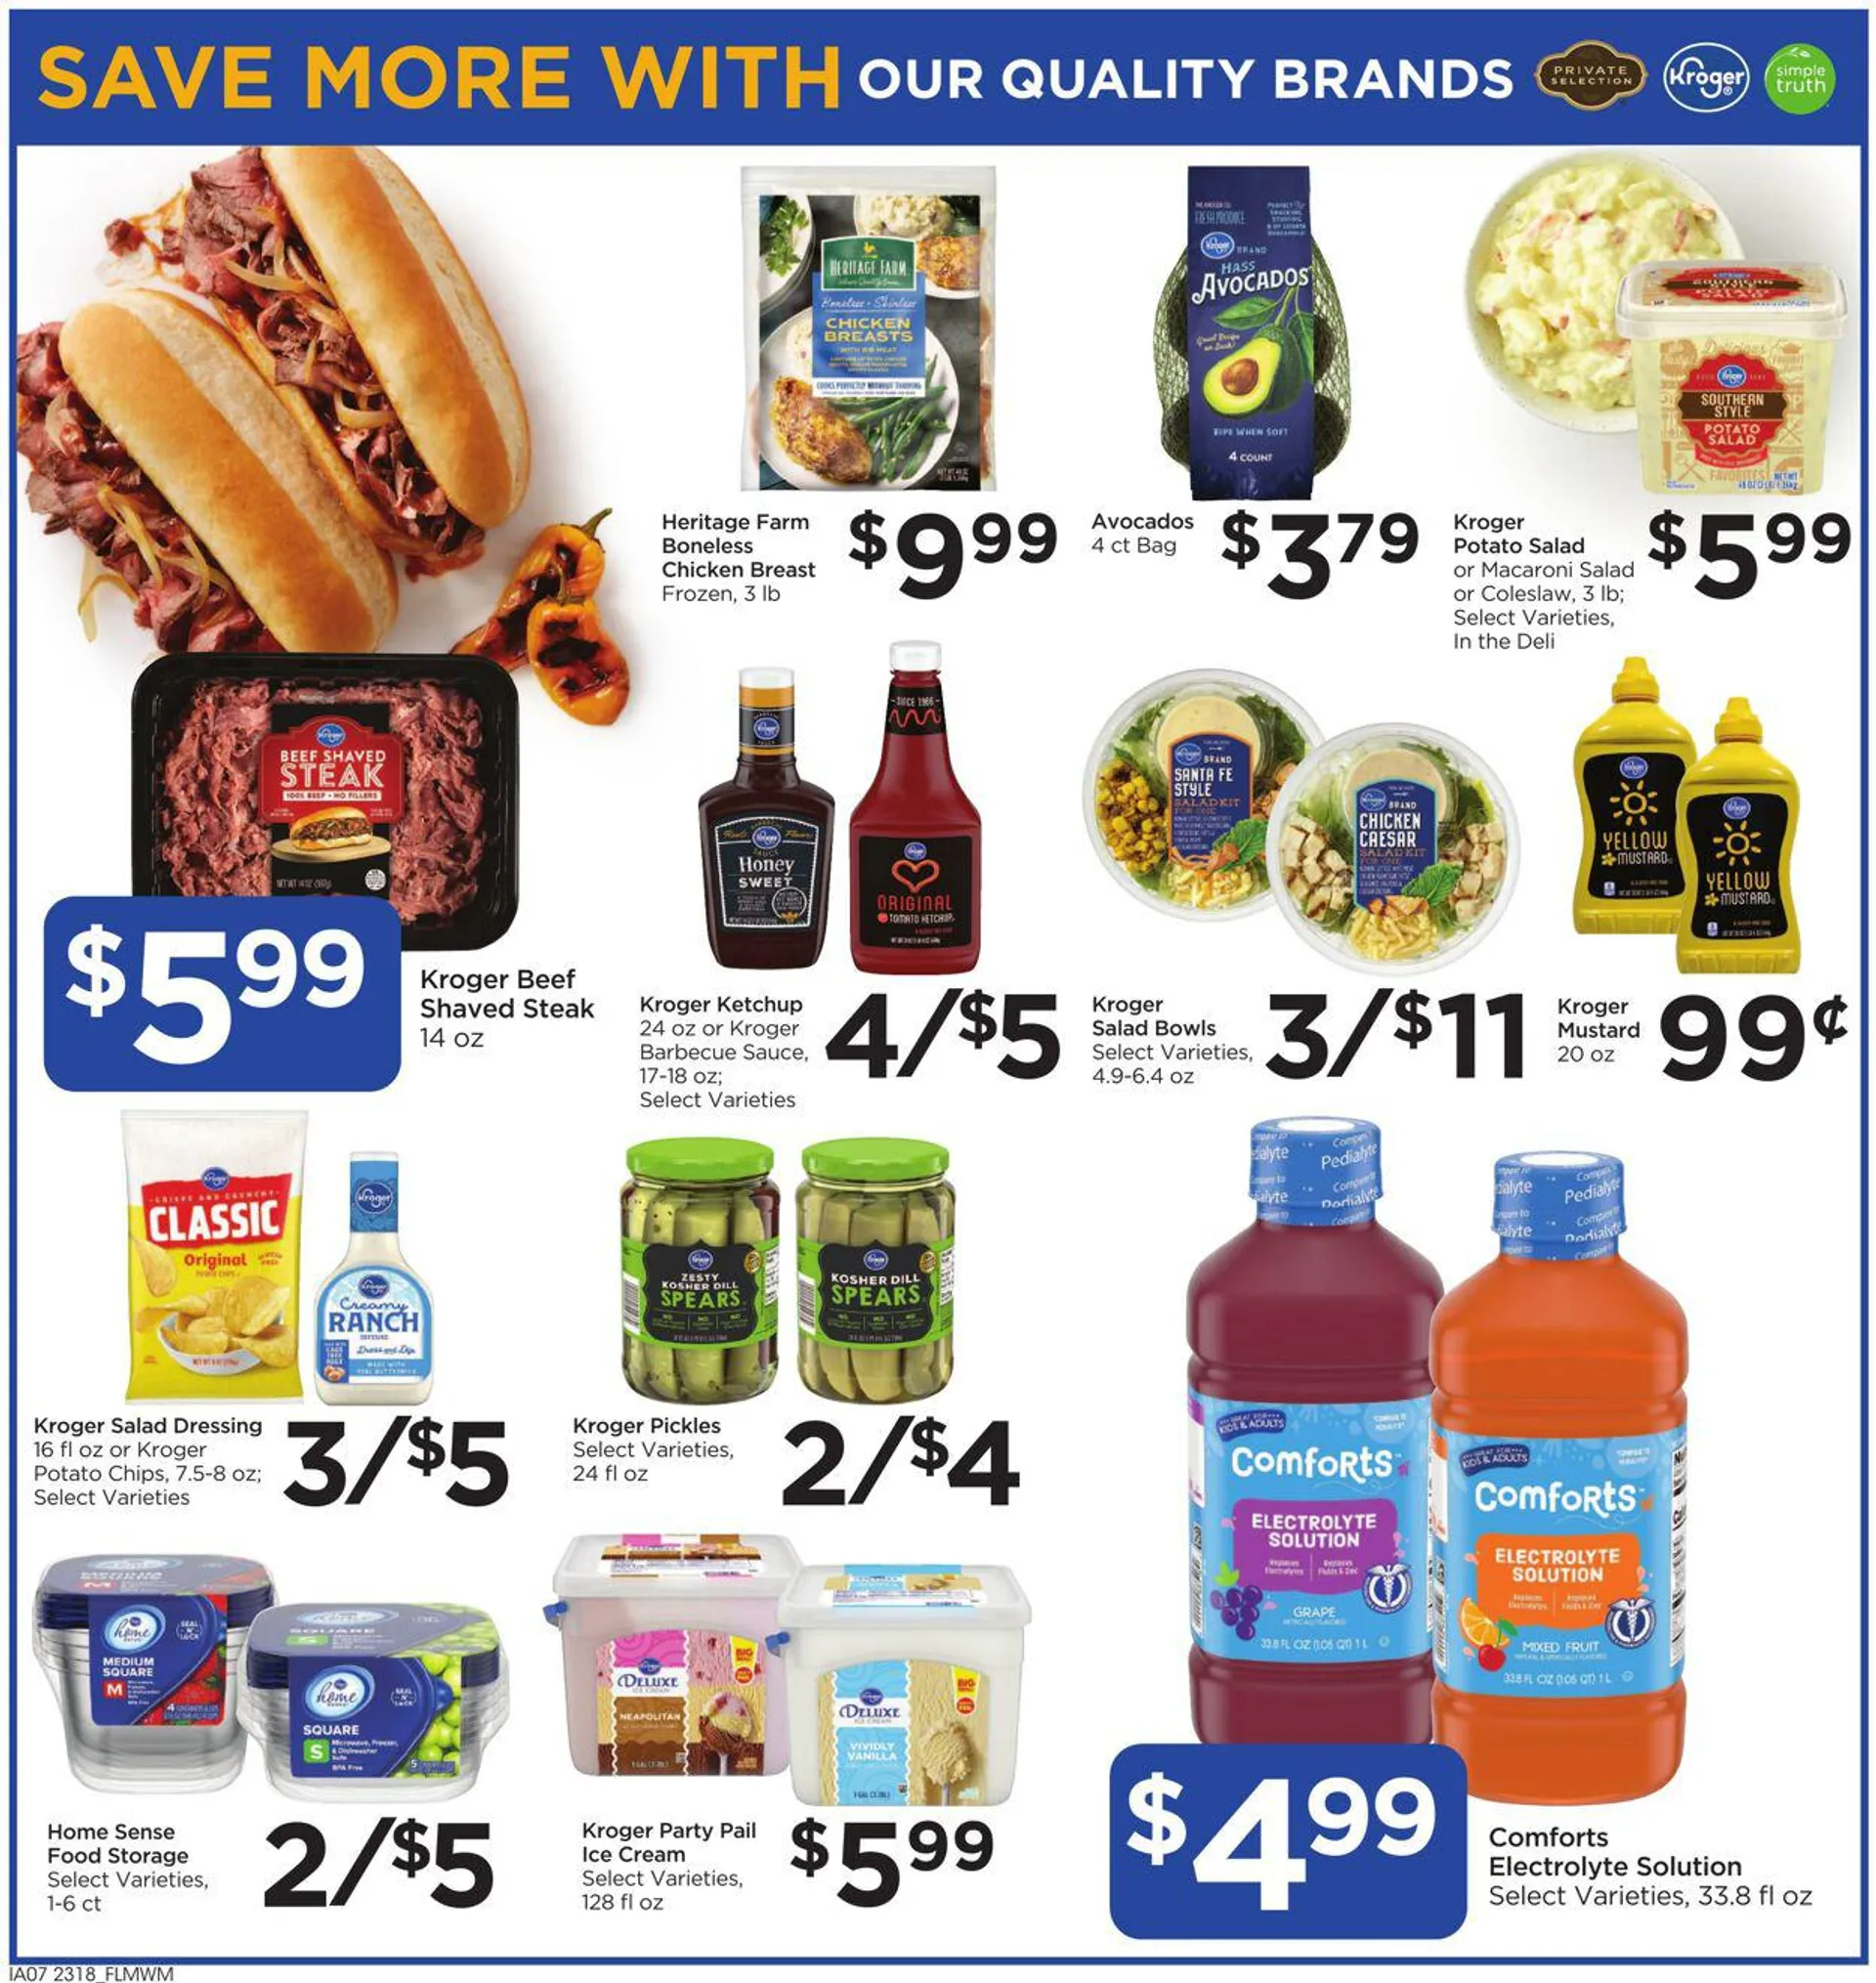 Food 4 Less Current weekly ad - 7